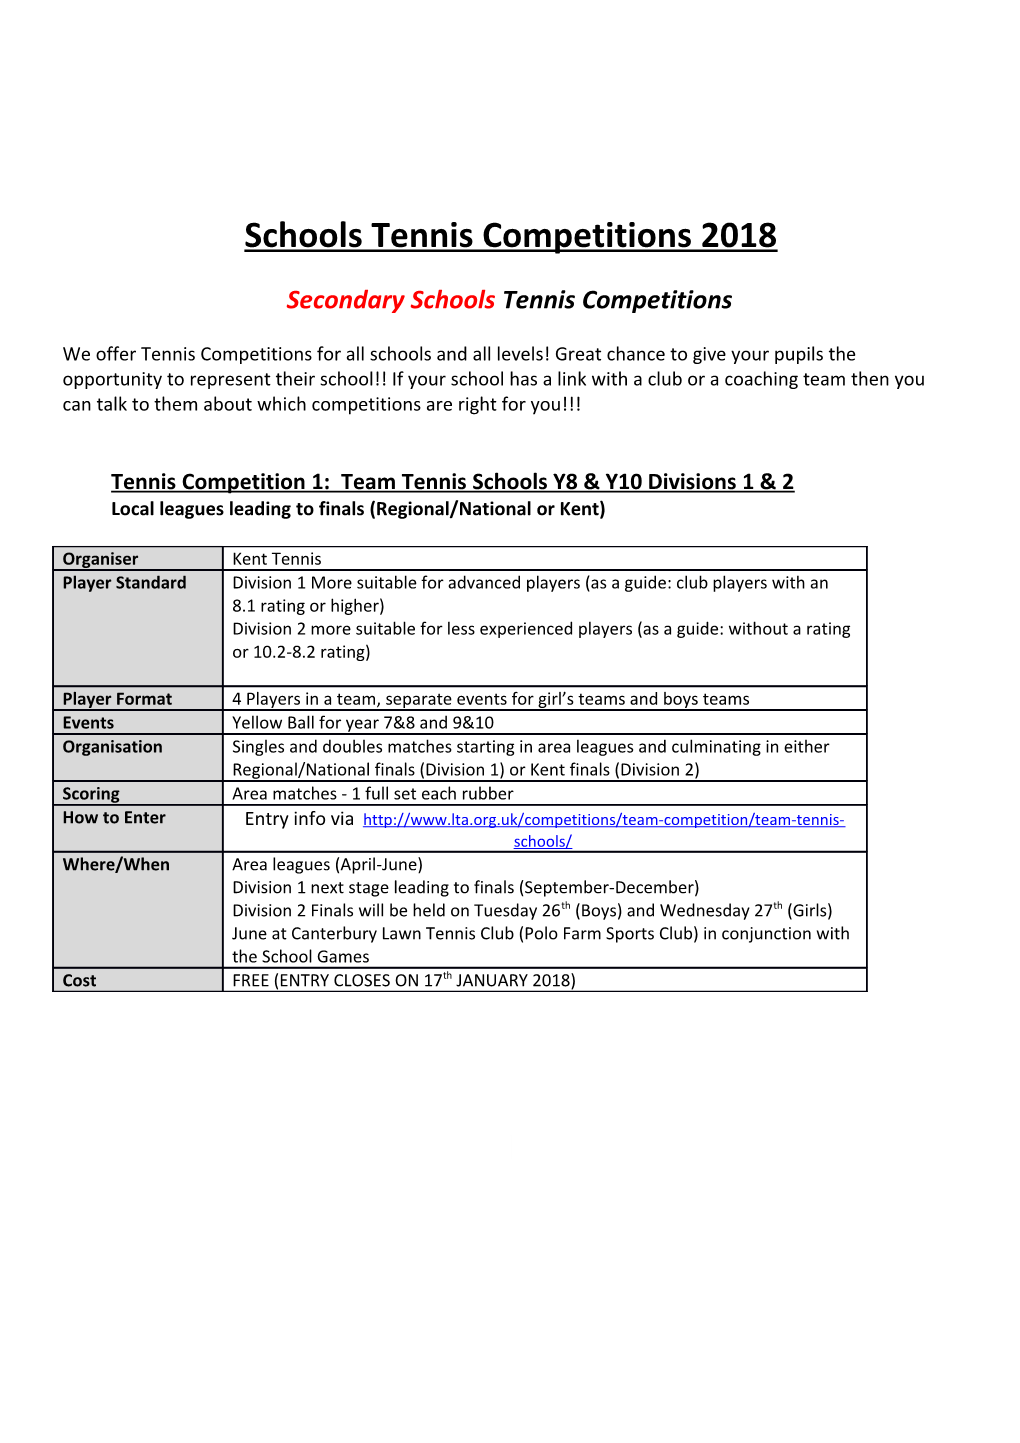 Secondary Schools Tennis Competitions